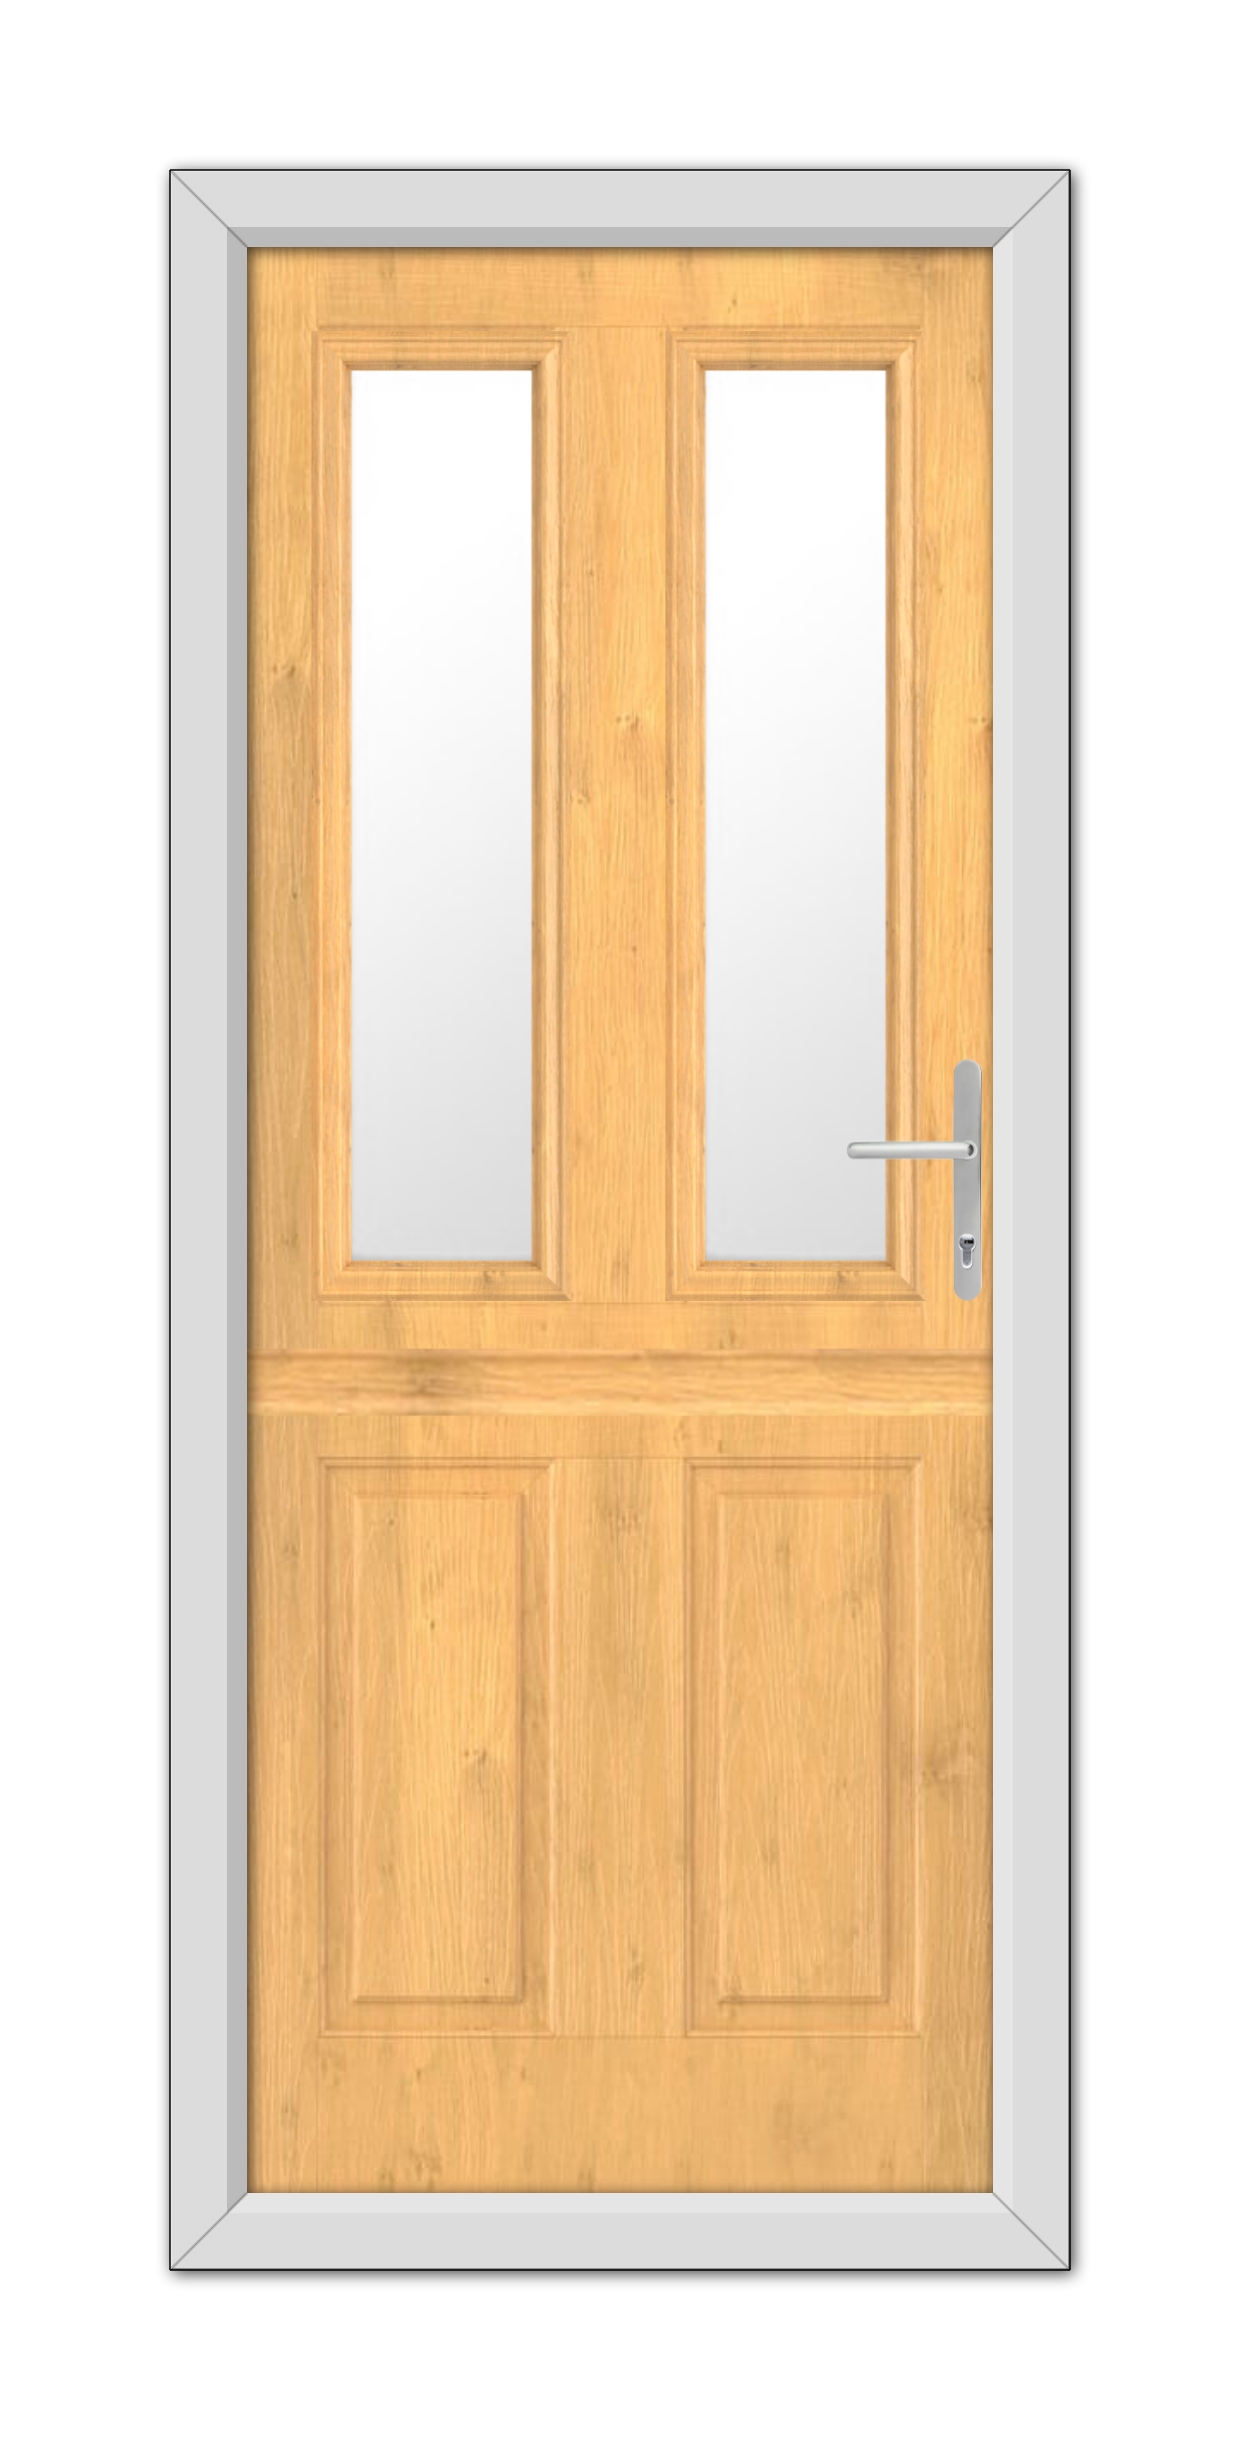 A modern wooden Irish Oak Whitmore Stable Composite Door 48mm Timber Core with glass panels and a metal handle, set in a gray frame, isolated on a white background.